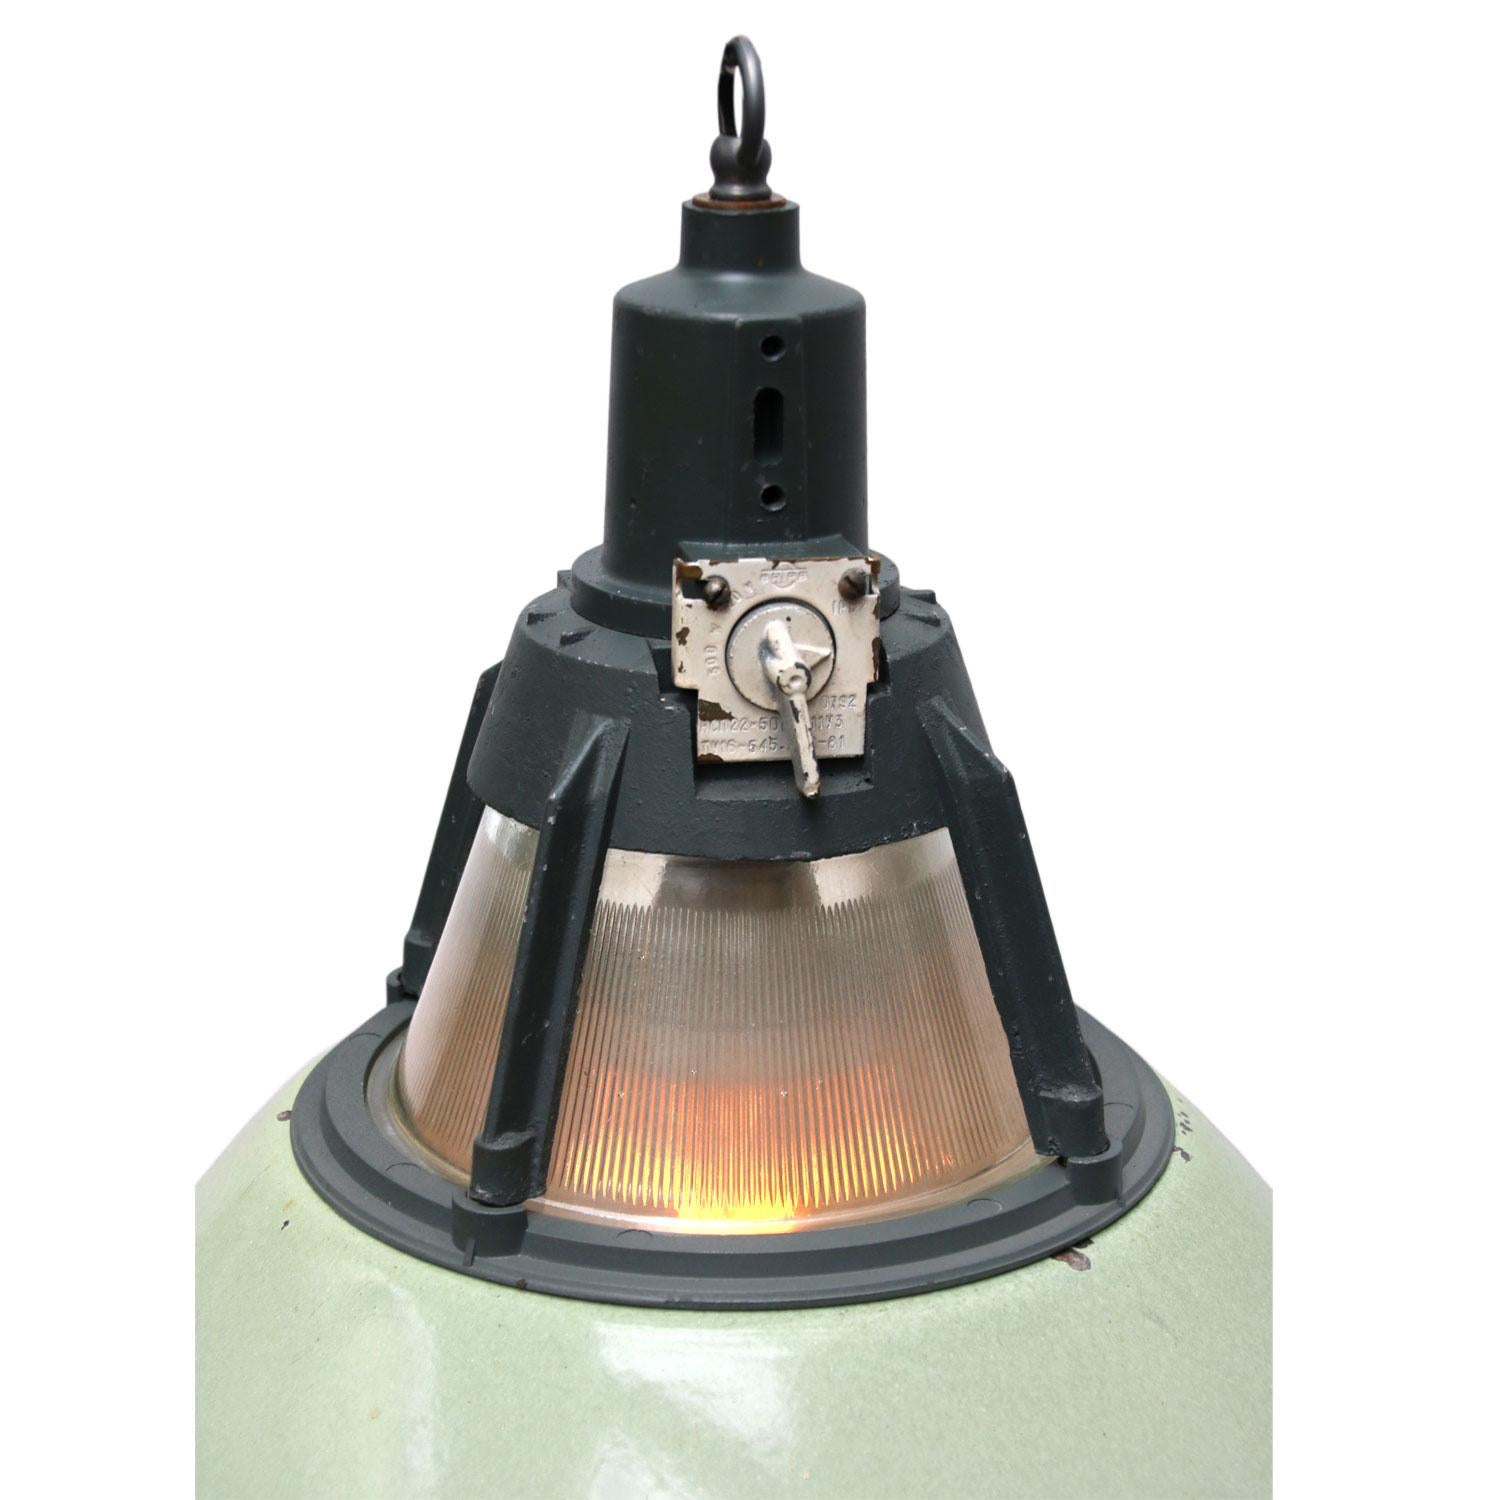 Enamel Industrial pendant. Green enamel shade, white inside.
Dark grey/green cast aluminium top.

Weight: 3.5 kg / 7.7 lb

All lamps have been made suitable by international standards for incandescent light bulbs, energy-efficient and LED